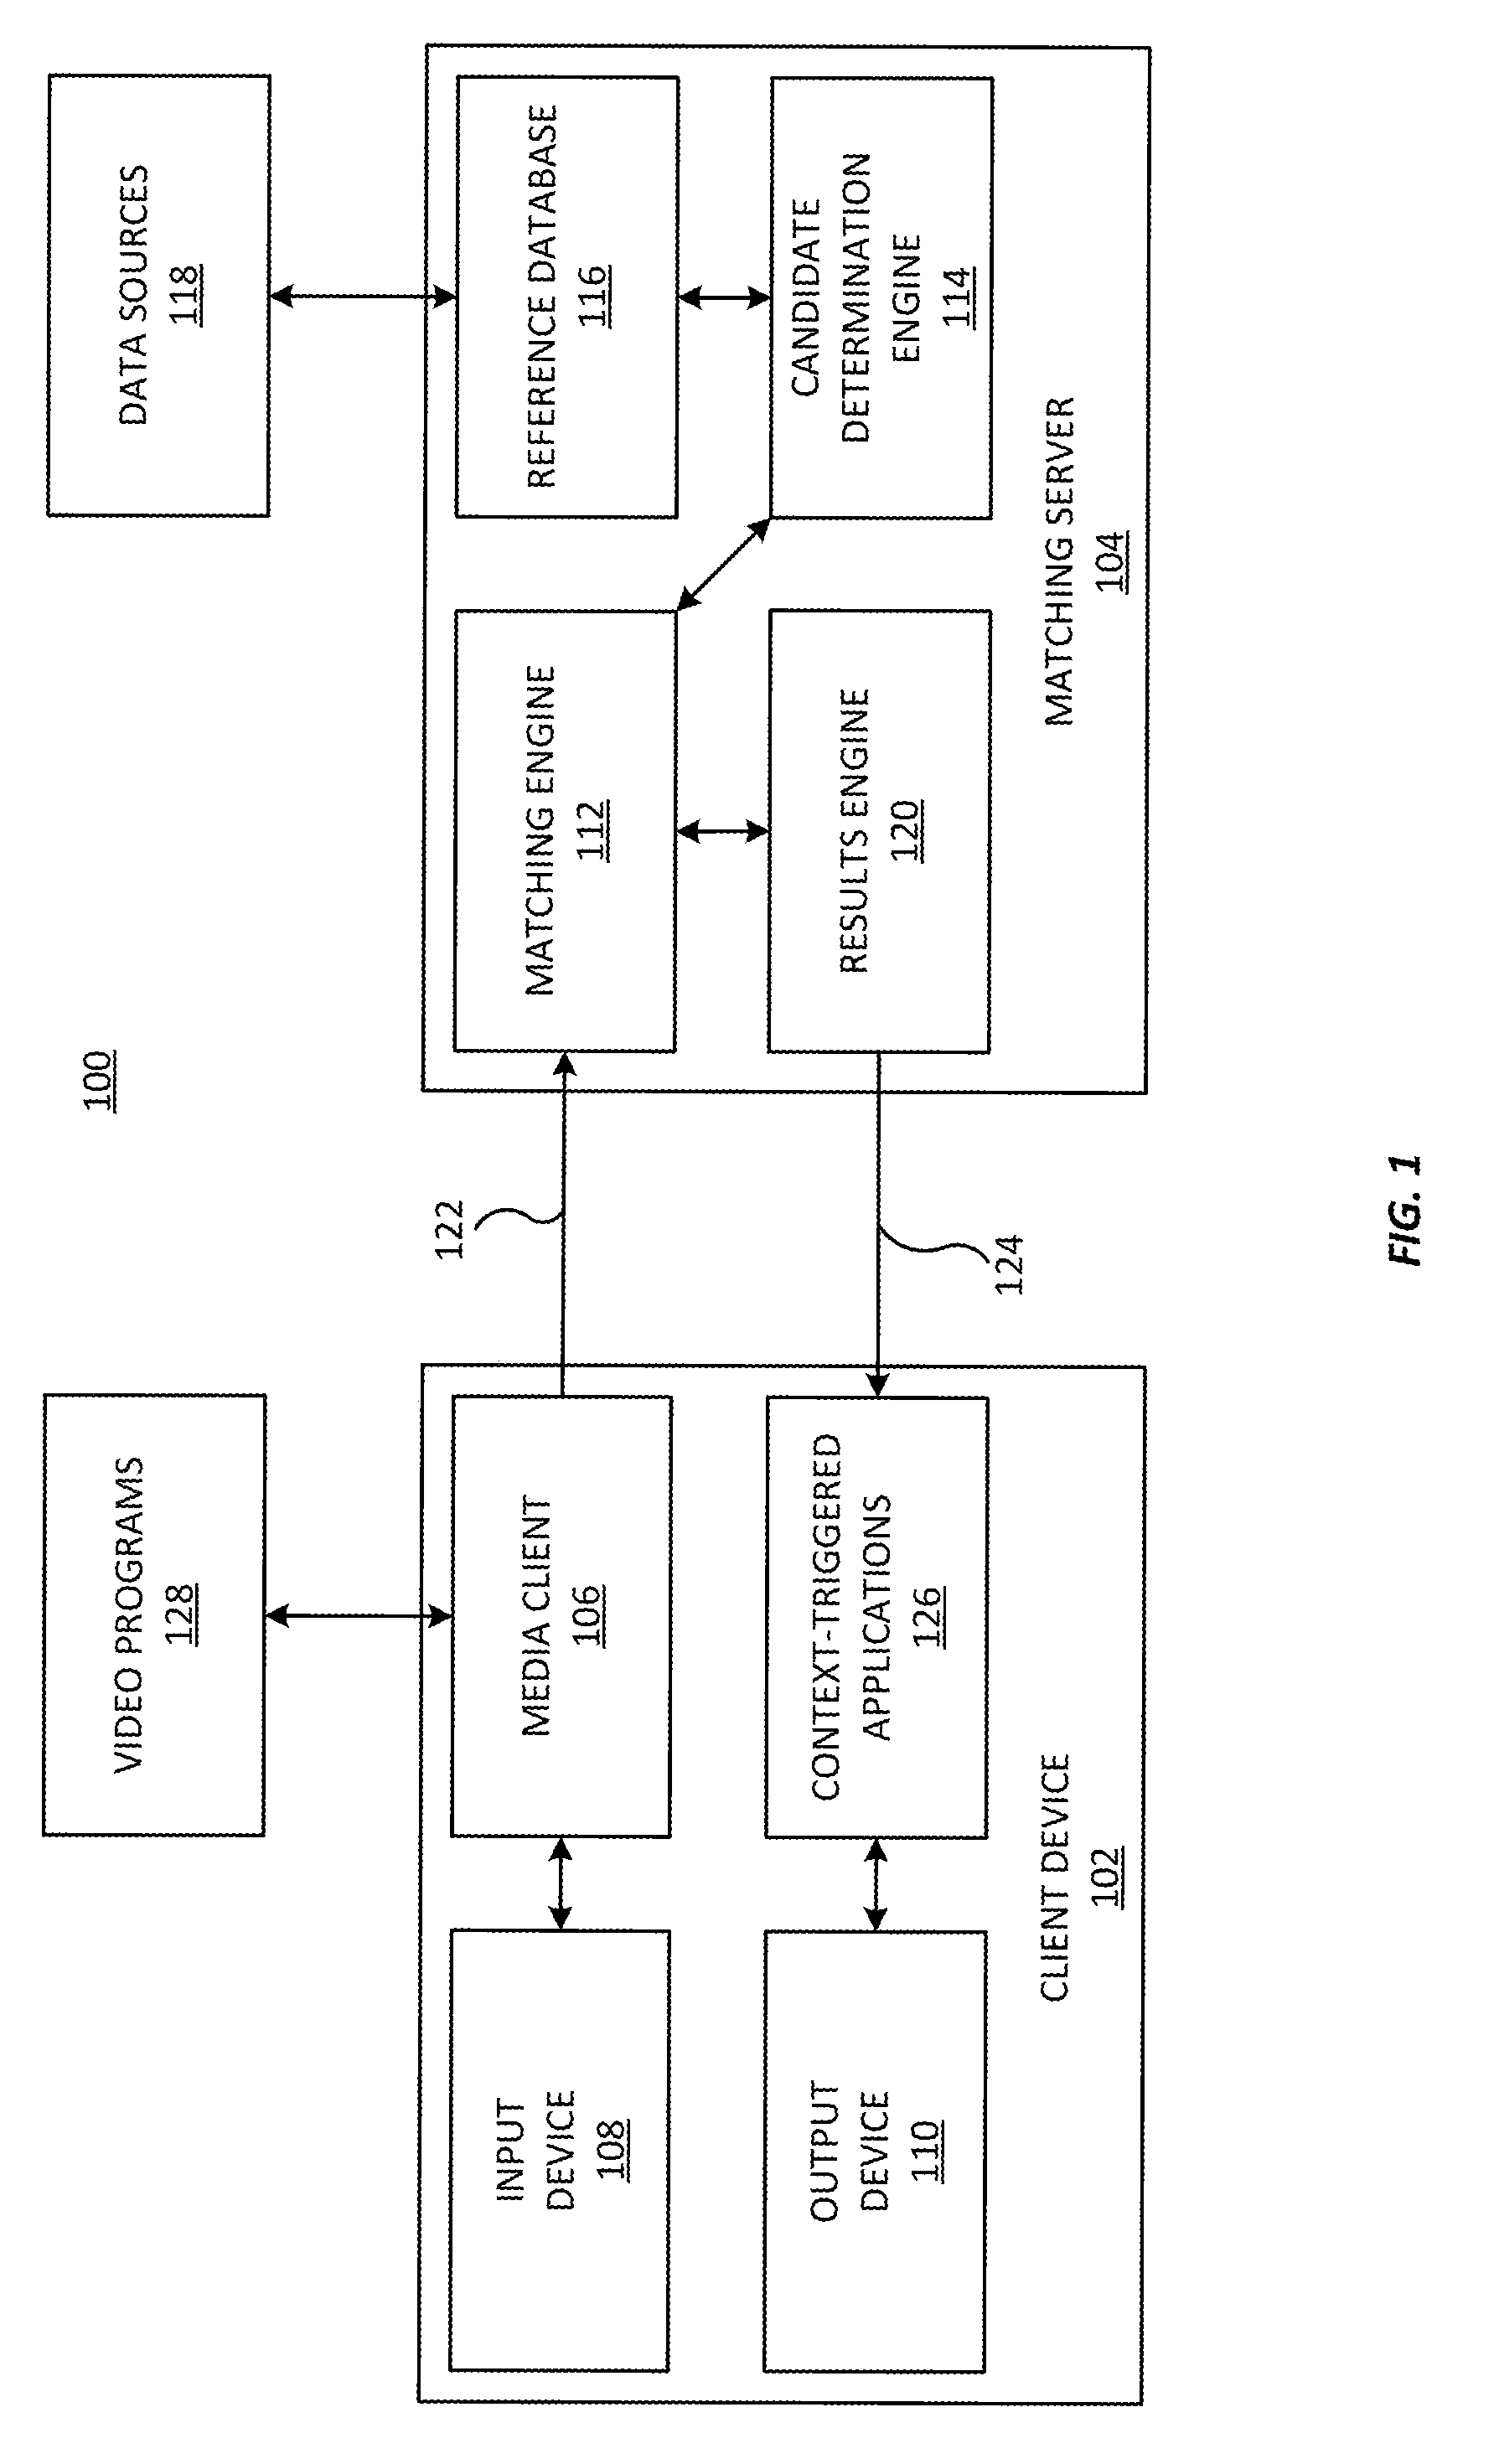 Systems and methods for partitioning search indexes for improved efficiency in identifying media segments